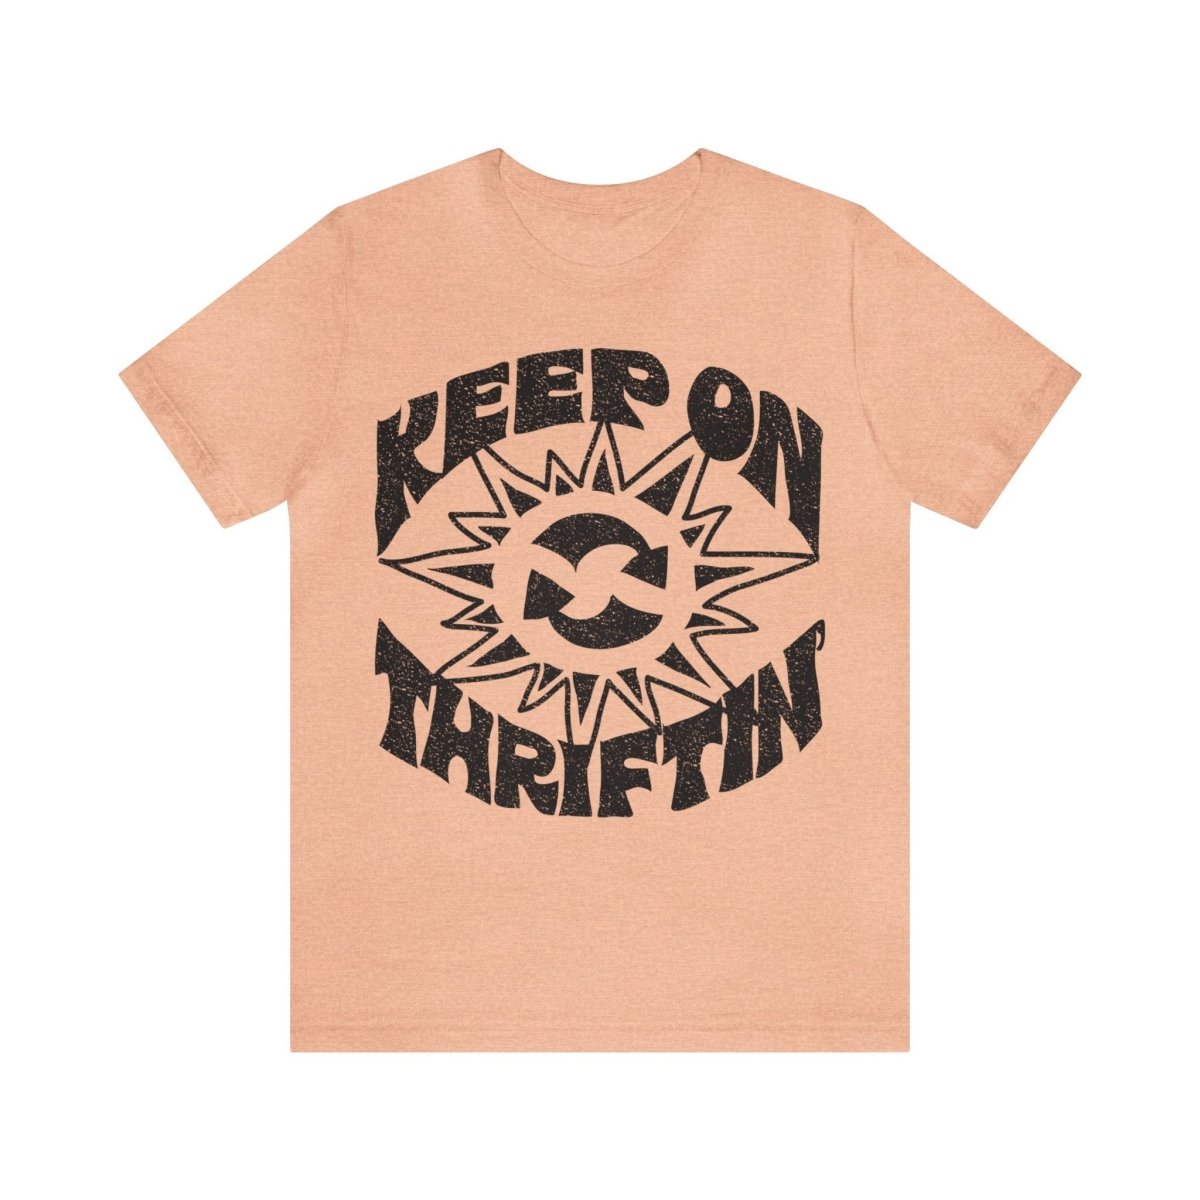 Keep On Thriftin' Premium T-Shirt, Thrift Stores, Home Made, Self Reliance, Reuse, Recycle, Upcycle, Junkin' Genius